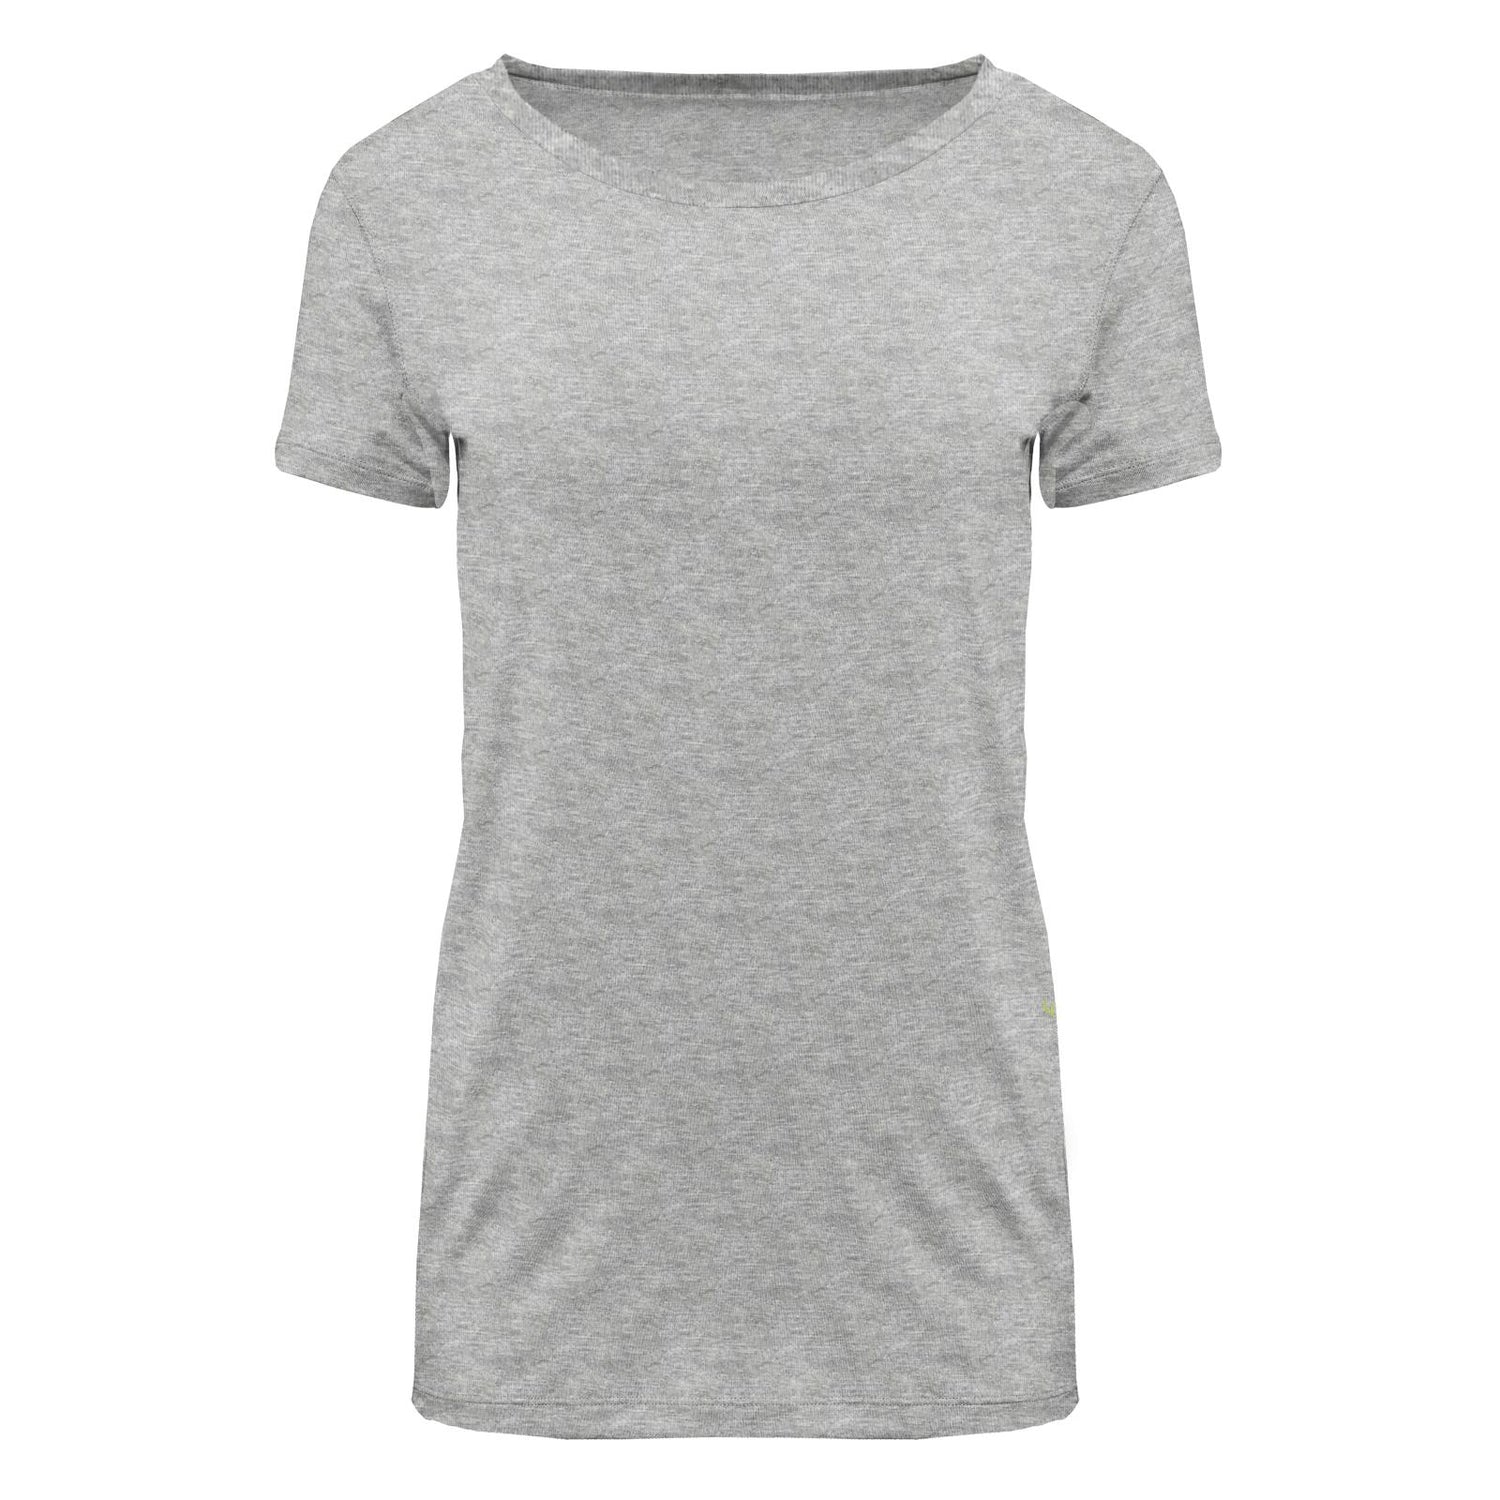 Women's Short Sleeve Relaxed Tee in Heathered Mist